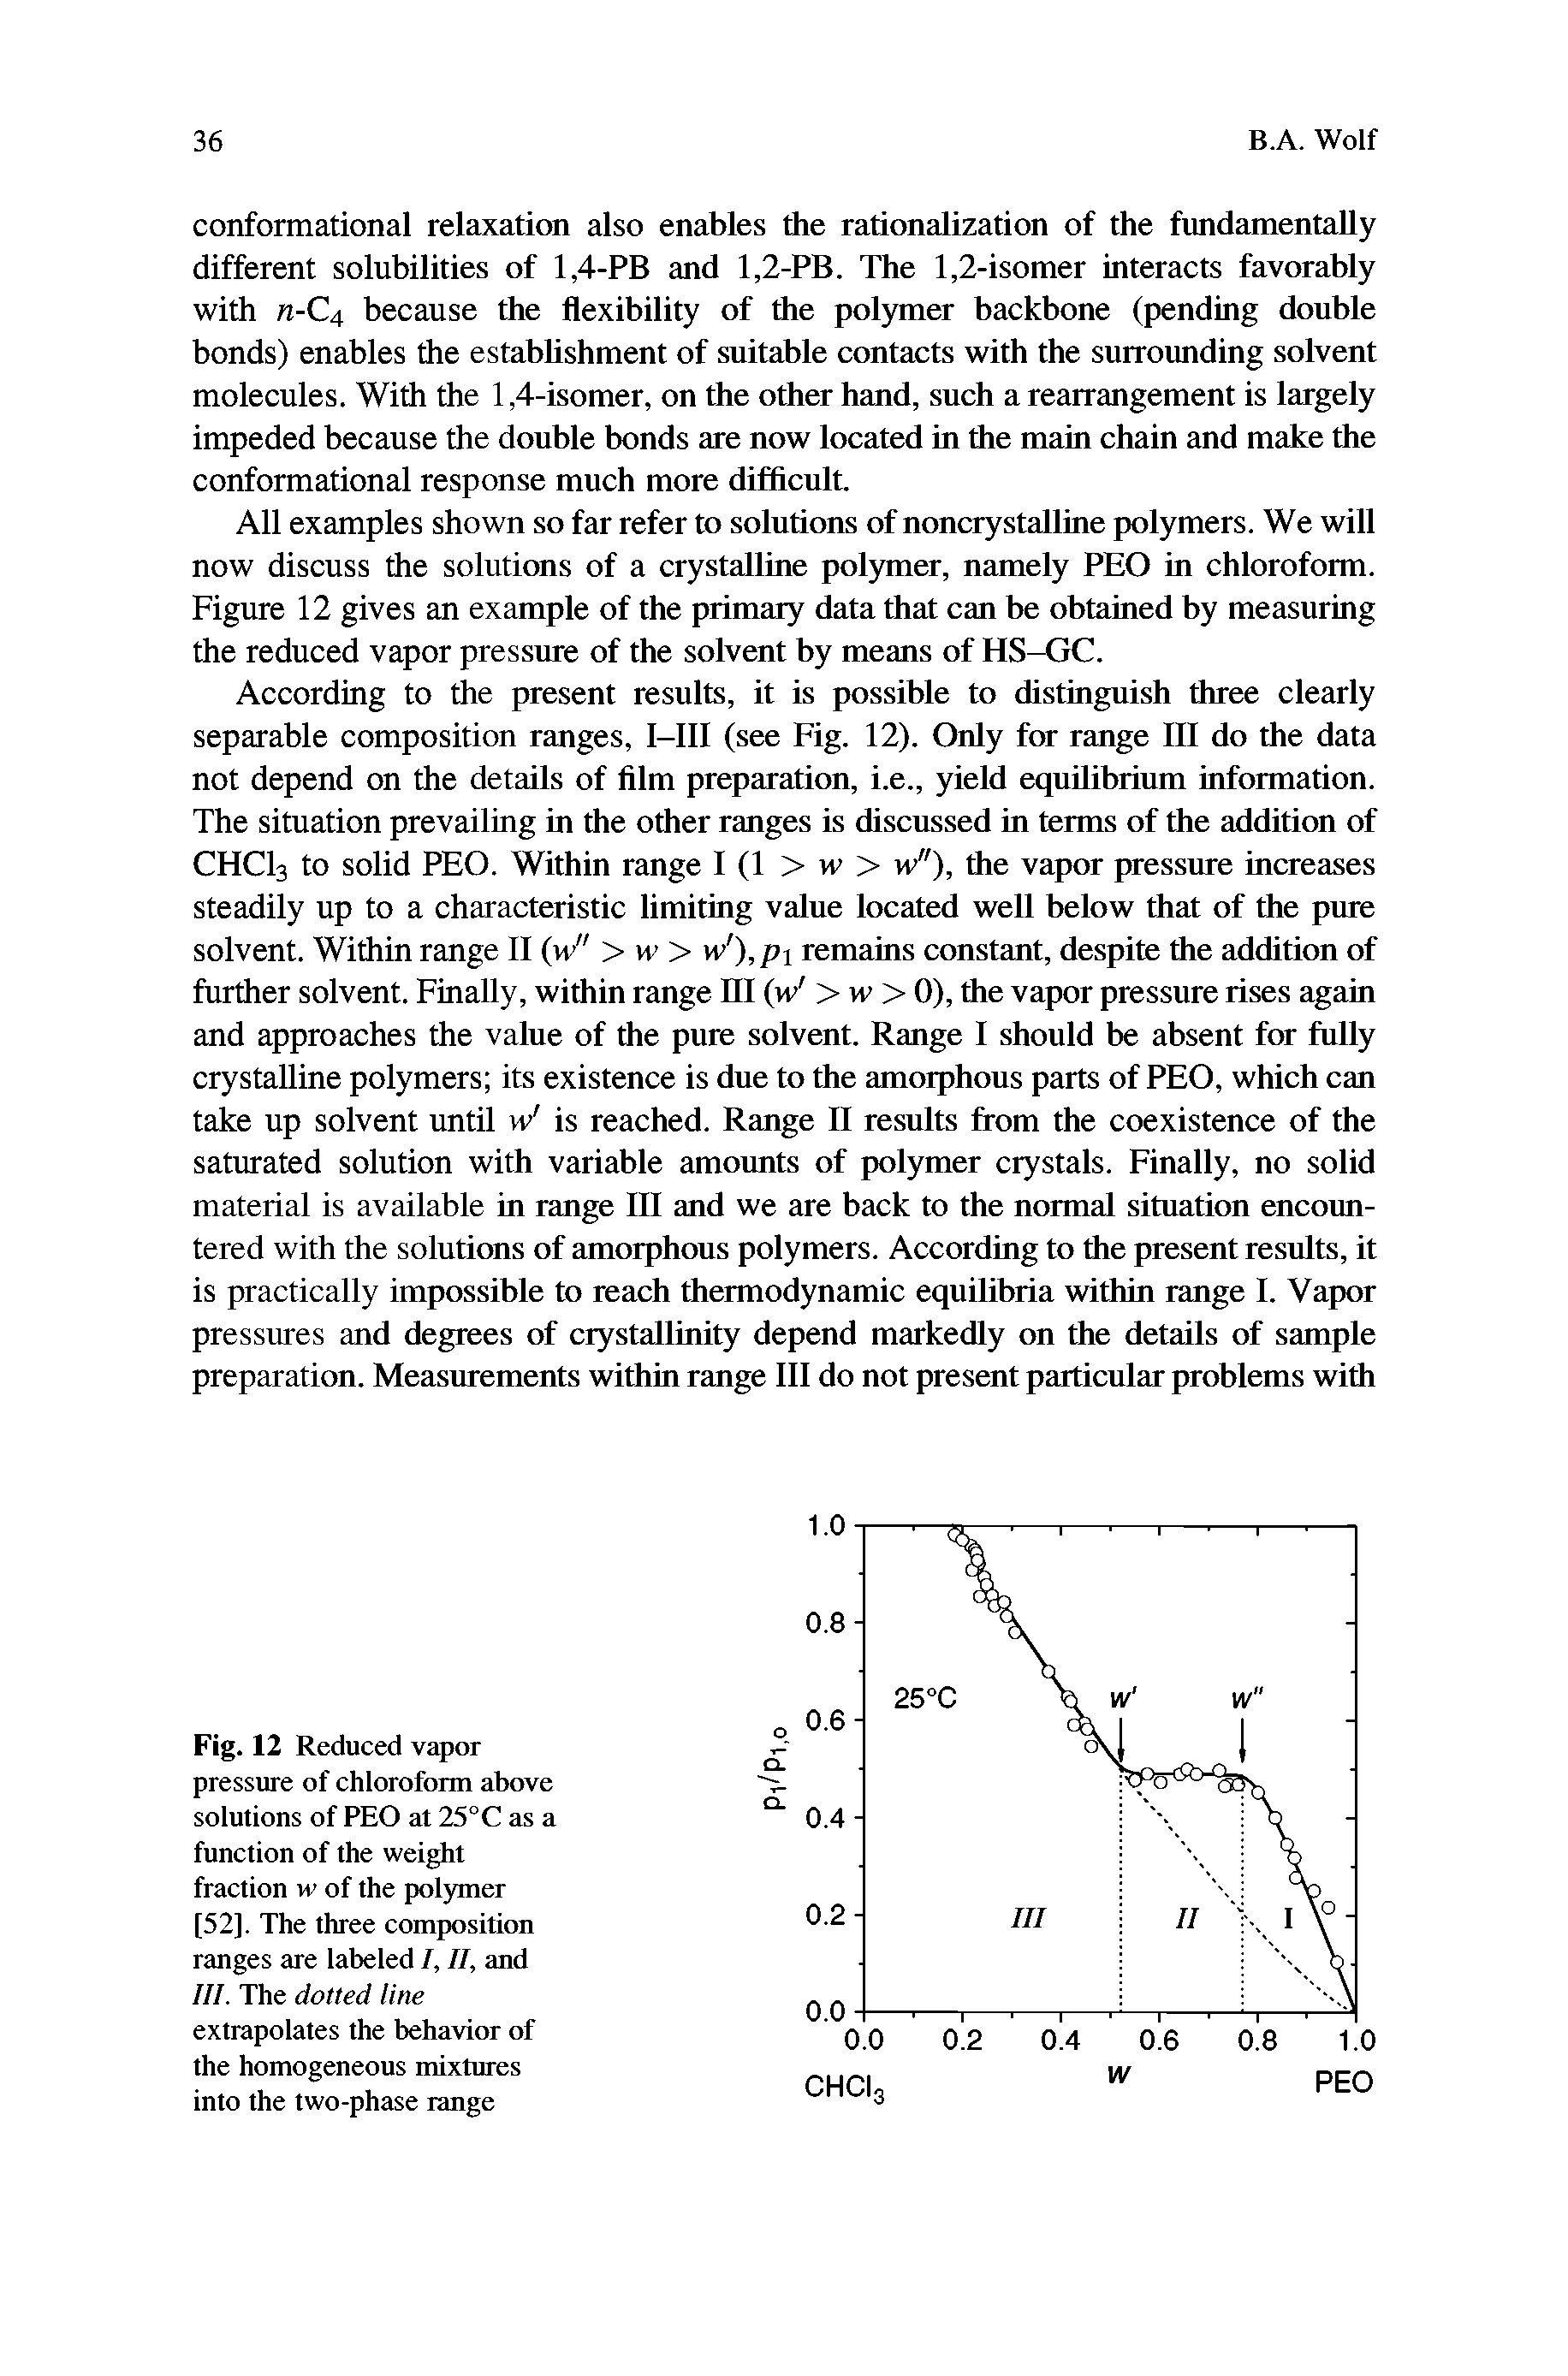 Fig. 12 Reduced vapor pressure of chloroform above solutions of PEO at 25°C as a function of the weight fraction w of the polymer [52]. The three composition ranges are labeled I, II, and III. The dotted line extrapolates the behavior of the homogeneous mixtures into the two-phase range...